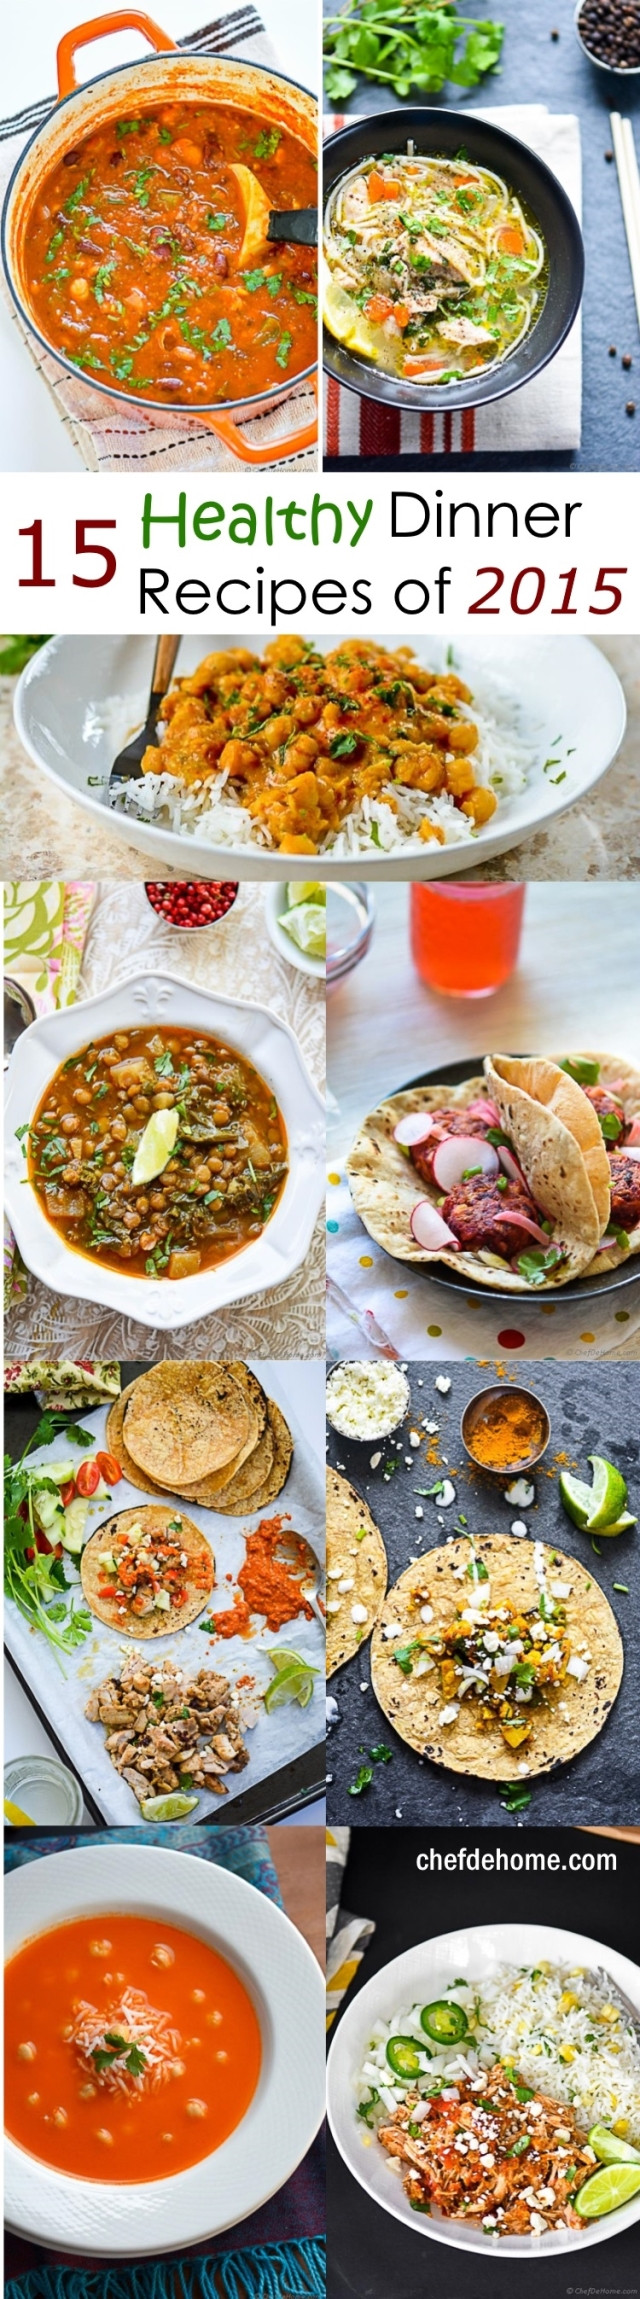 New Year Dinner Ideas
 15 Top Healthy Dinner Recipes for New Year Meals